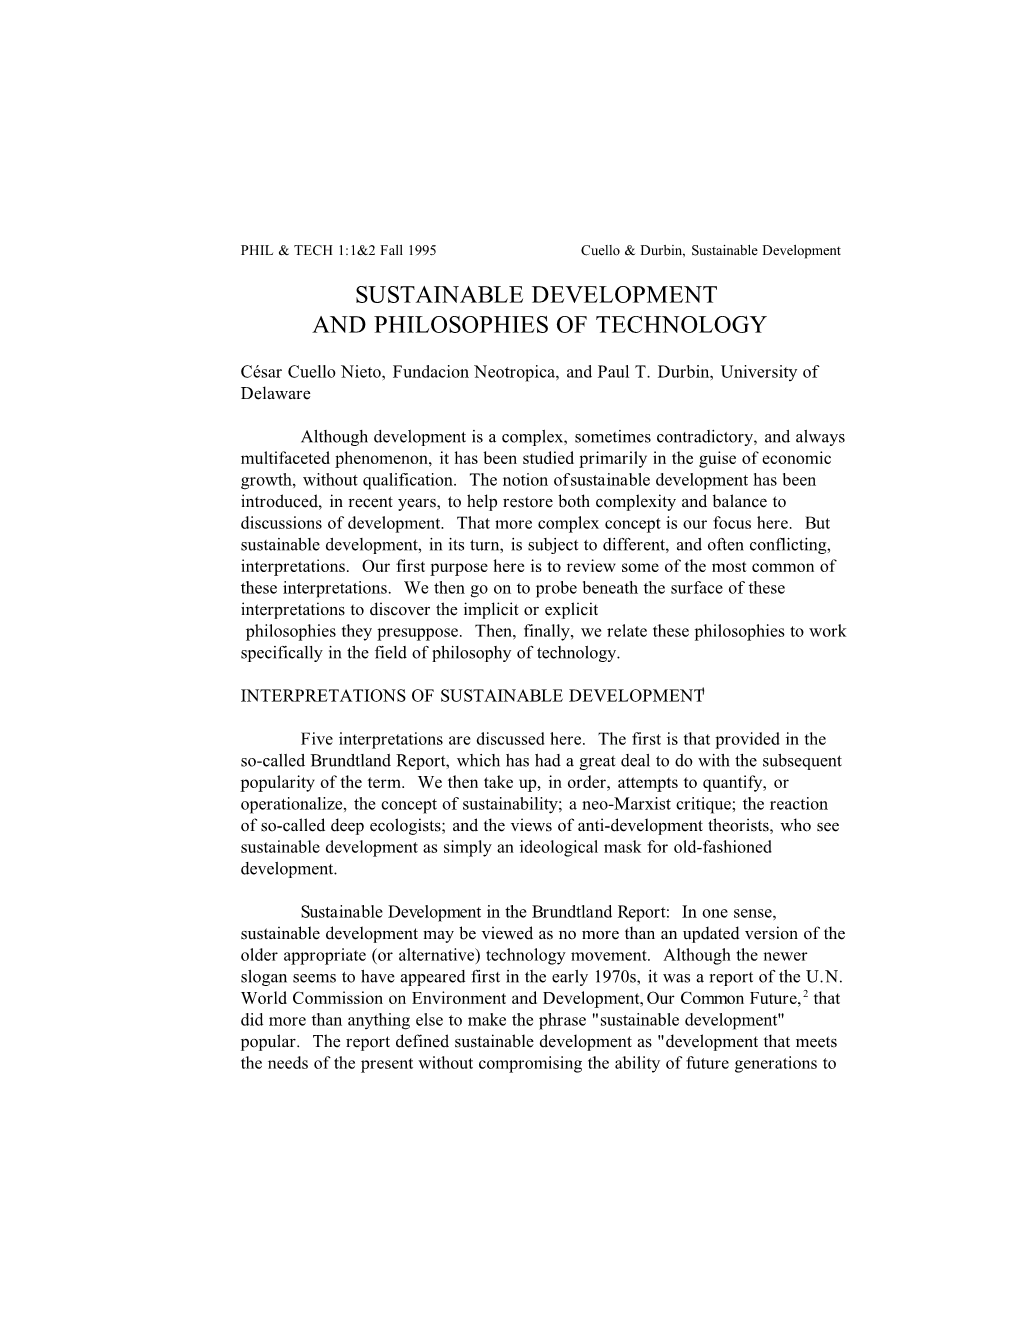 Sustainable Development and Philosophies of Technology